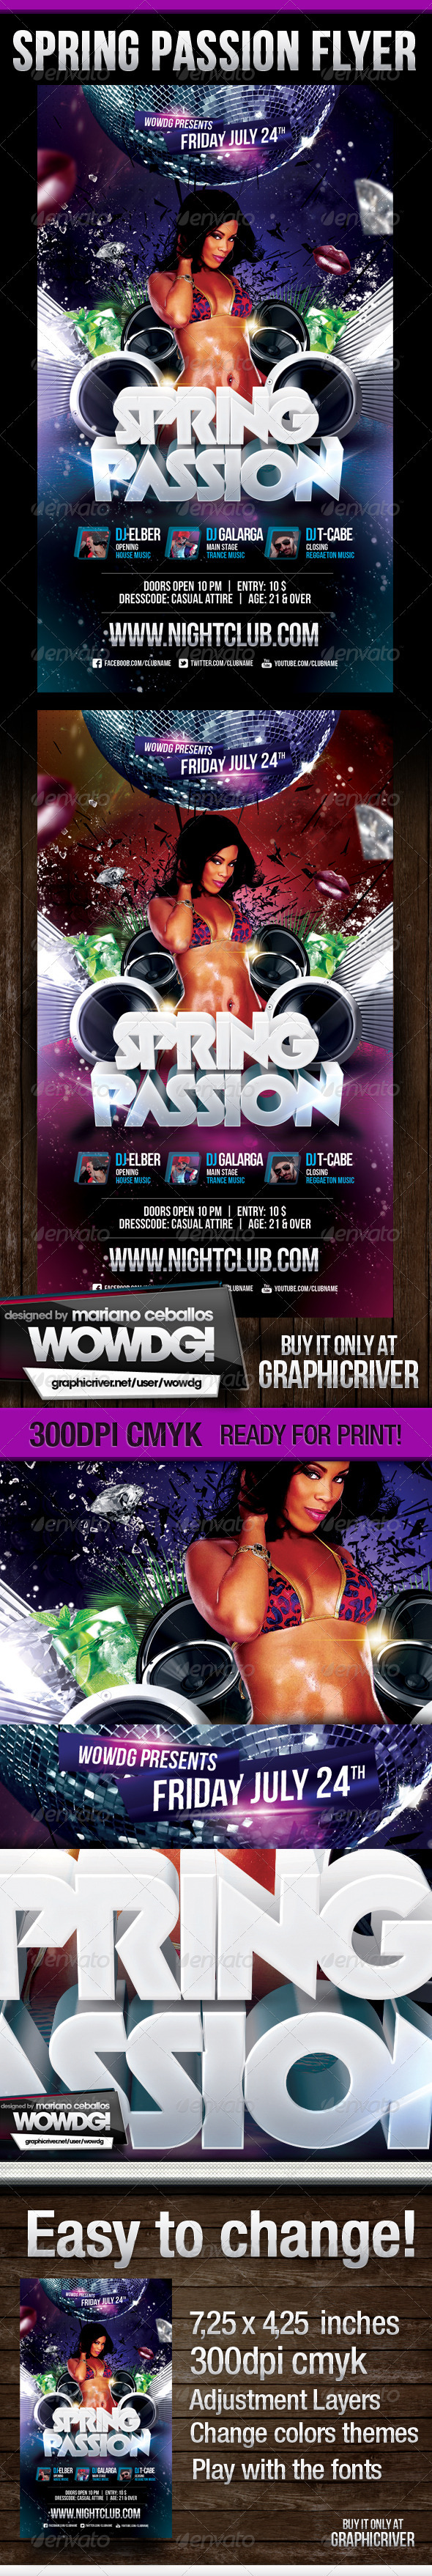 Spring Passion Party Flyer